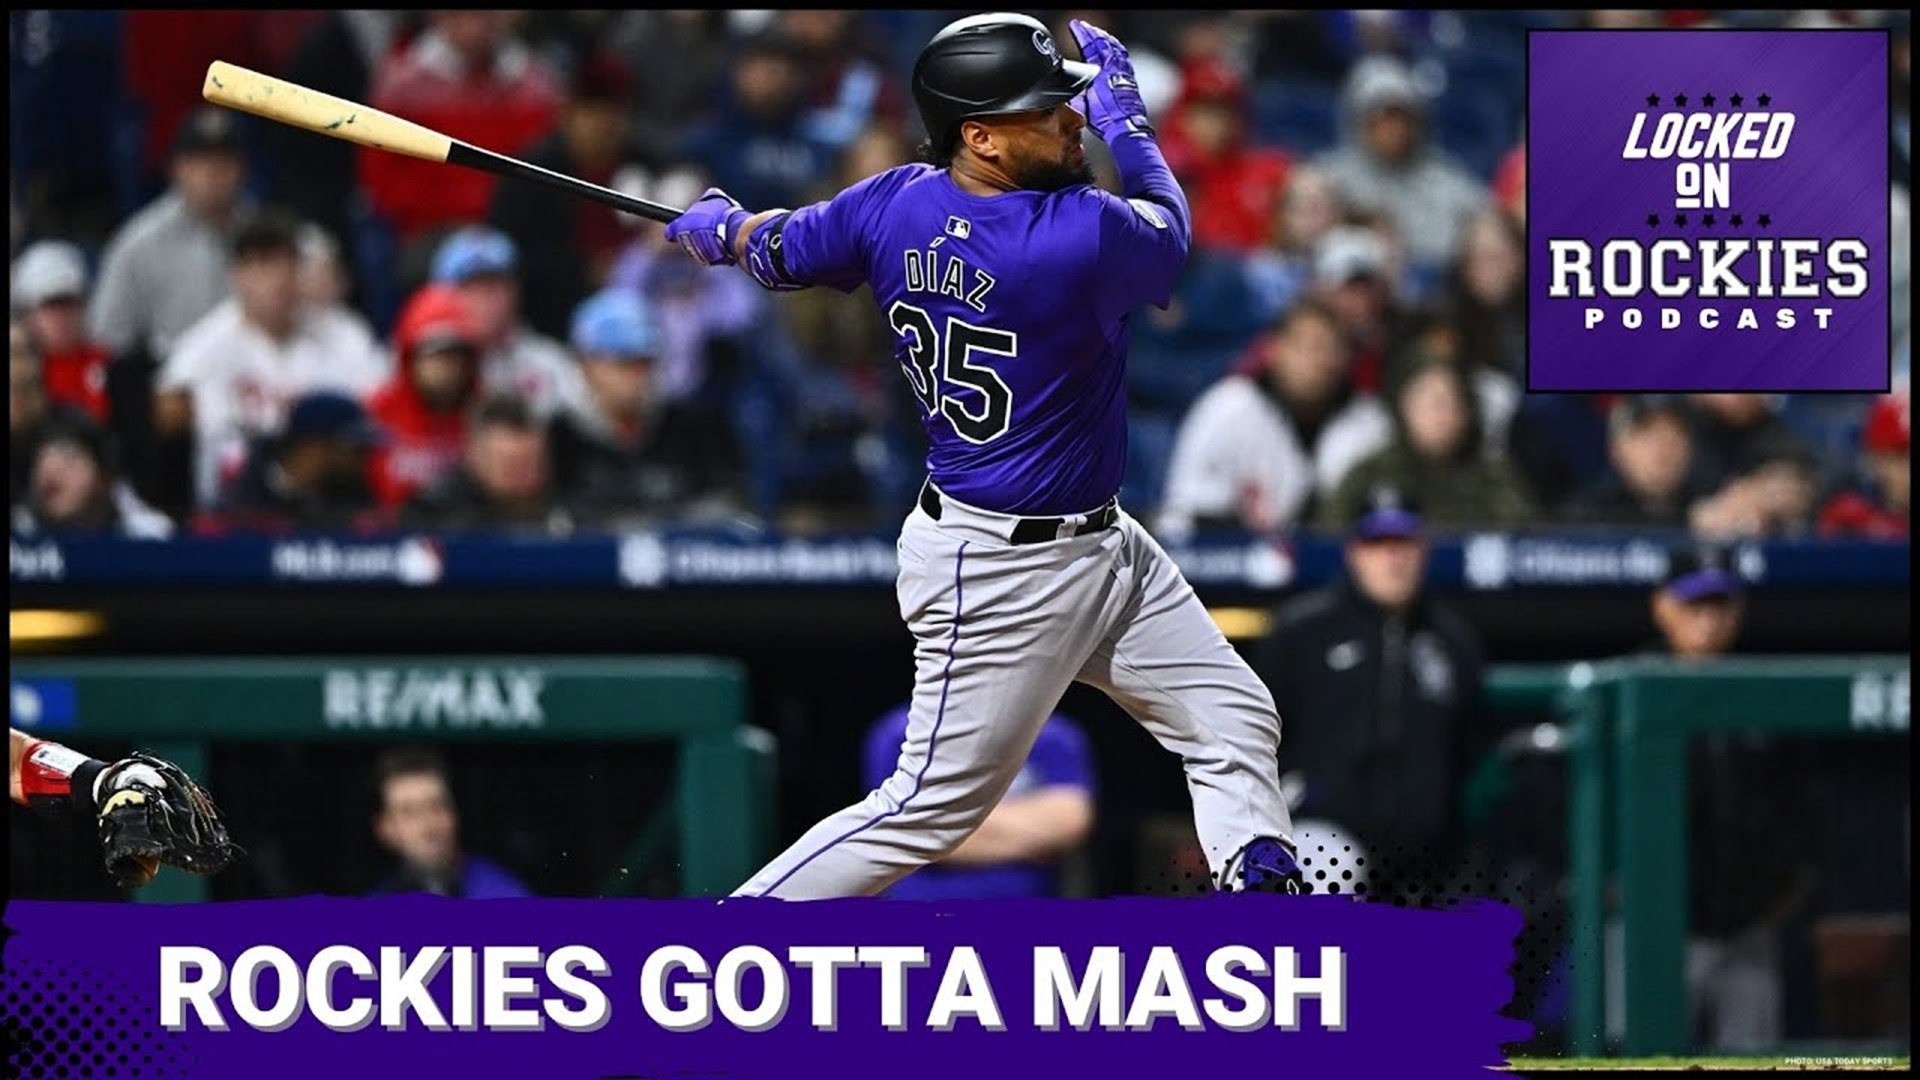 A true test of the Rockies offense is coming to Coors Field this weekend.